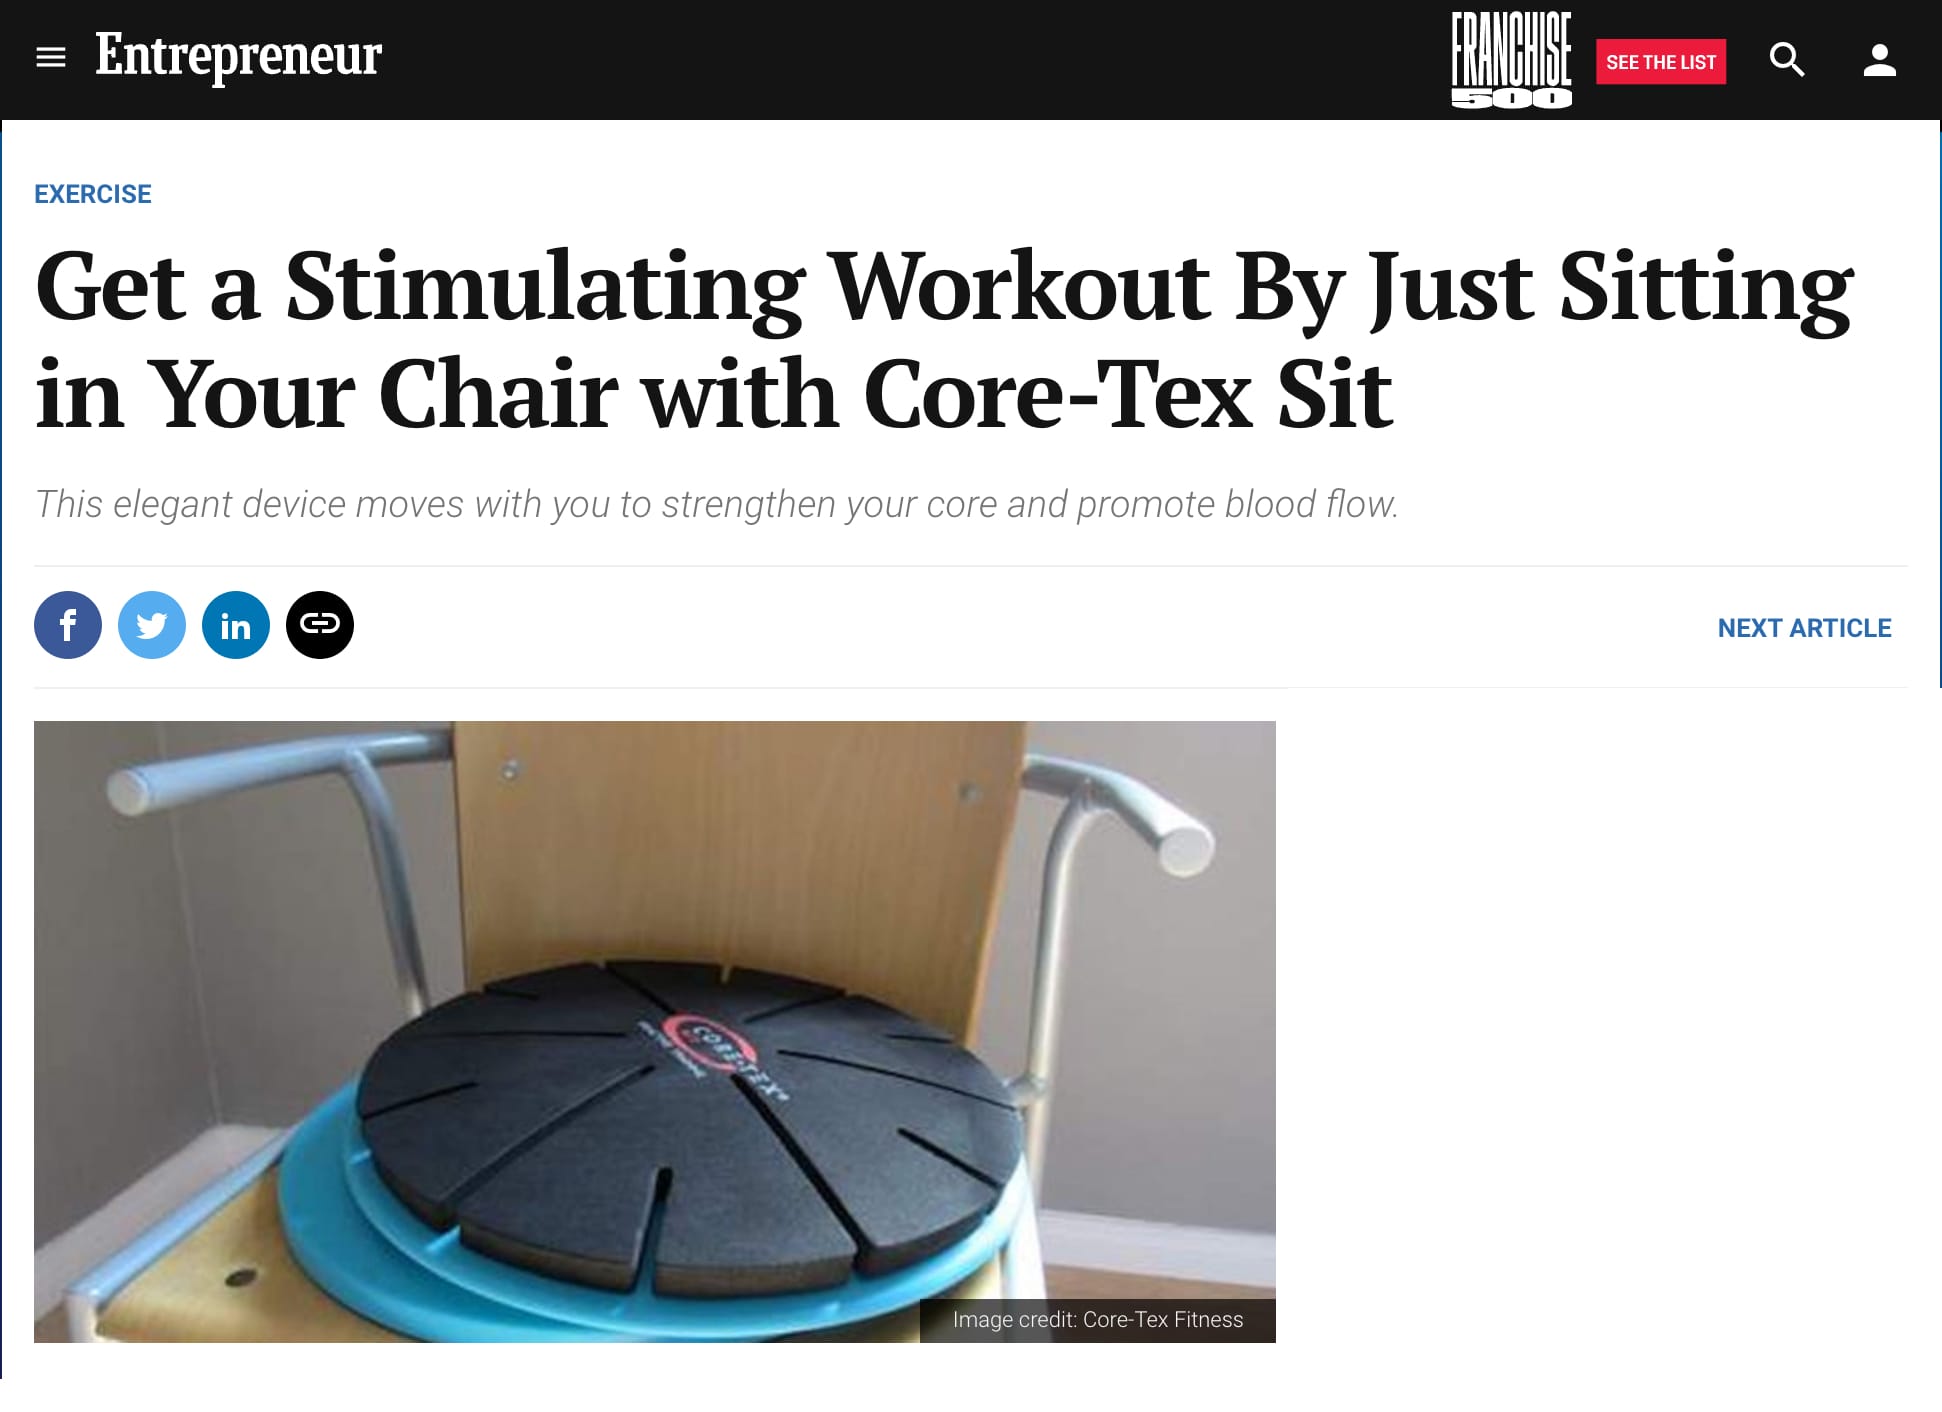 Entrepreneur: Get a Stimulating Workout By Just Sitting in Your Chair with Core-Tex Sit